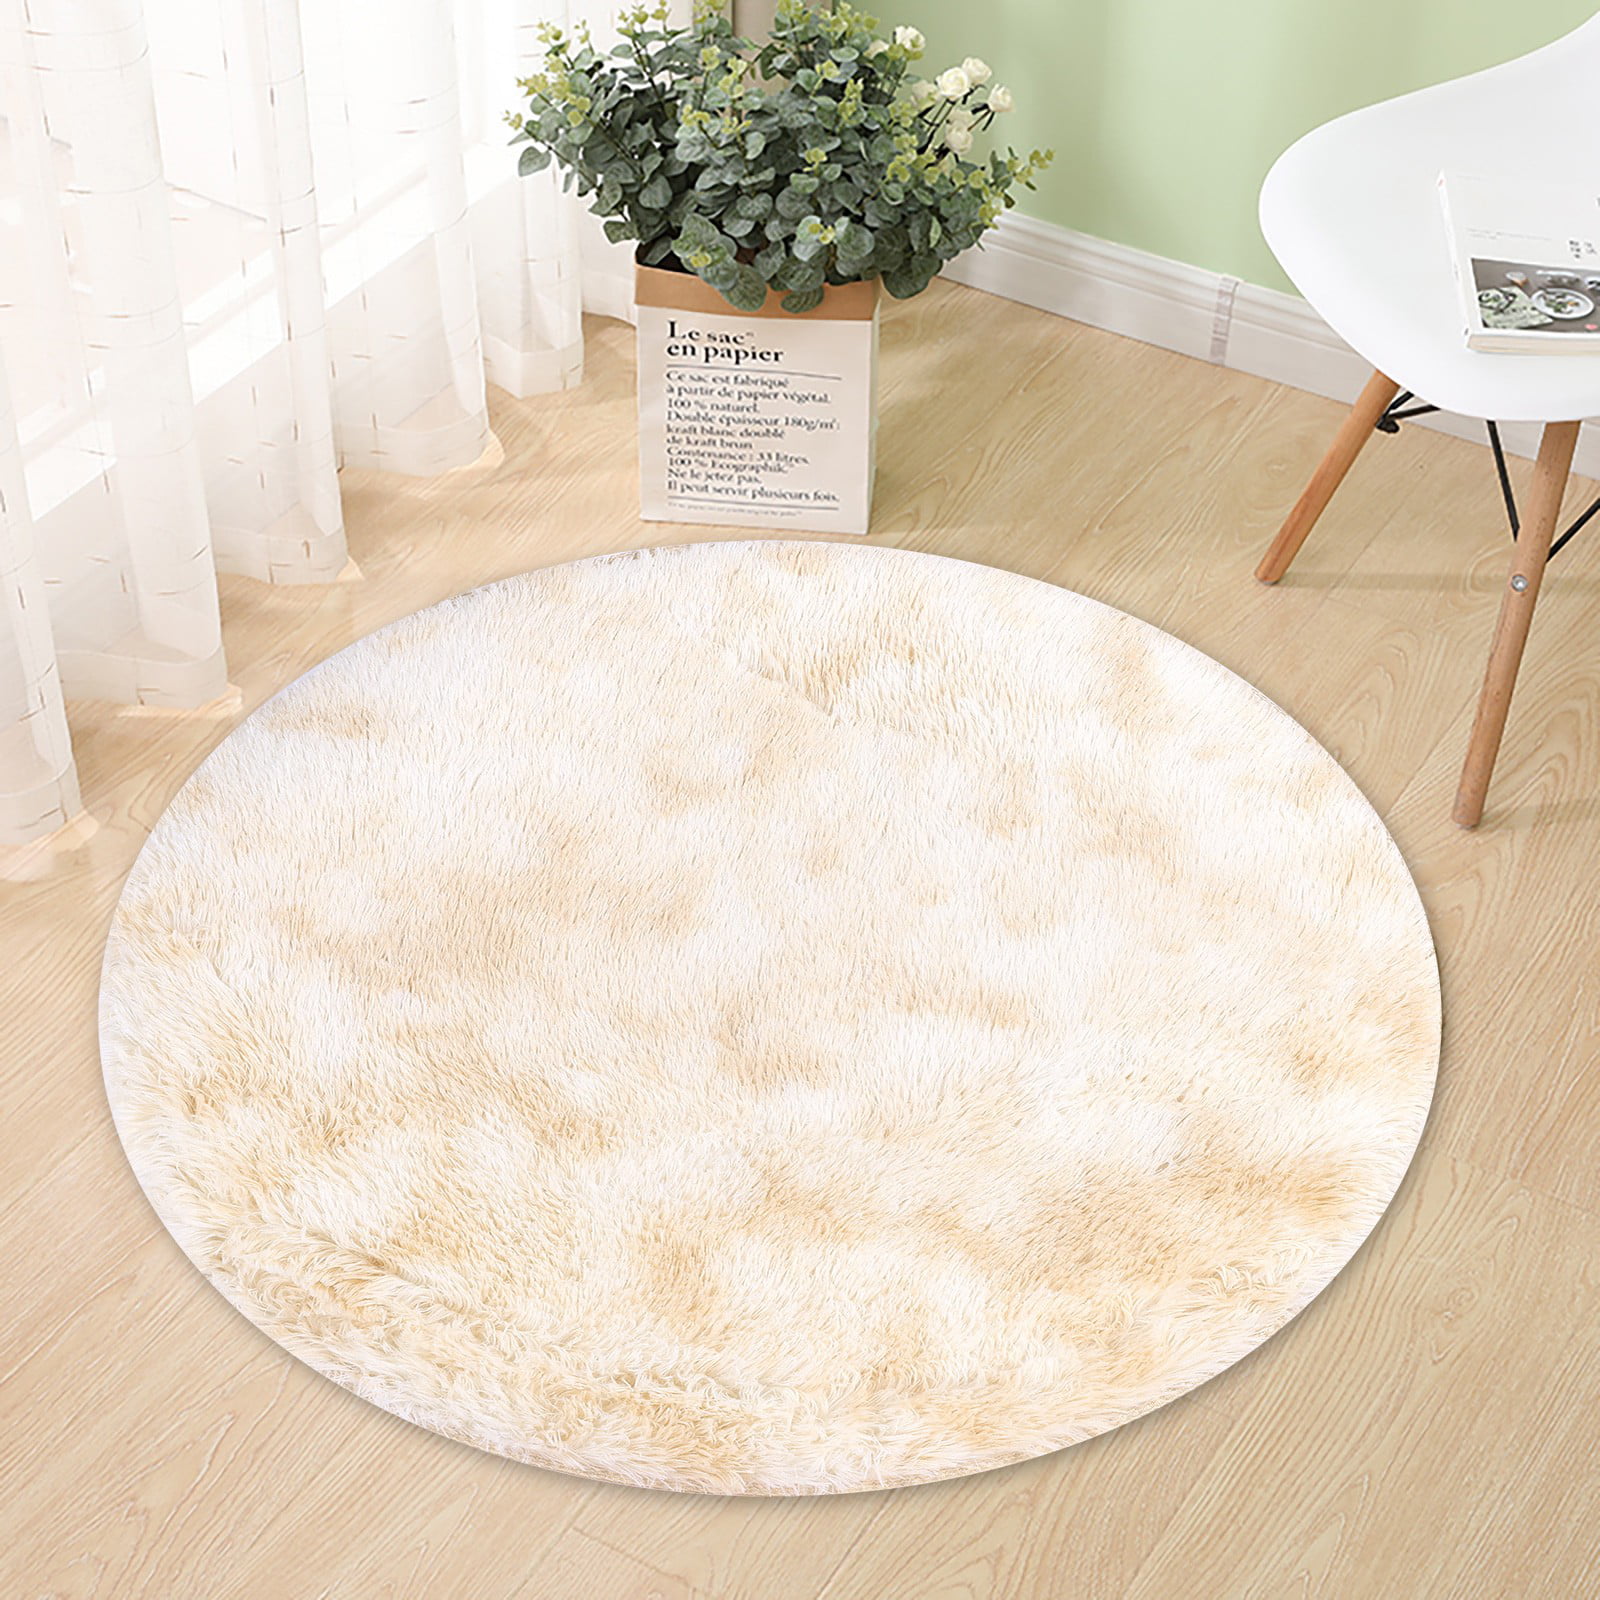 Round Area Rug 3 Feet Abstract Flower Tiger Butterfly Non-Slip Circular Area Rugs Kitchen Floor Mat Washable Floor Carpet for High Chair Bedroom Living Room Study Playing